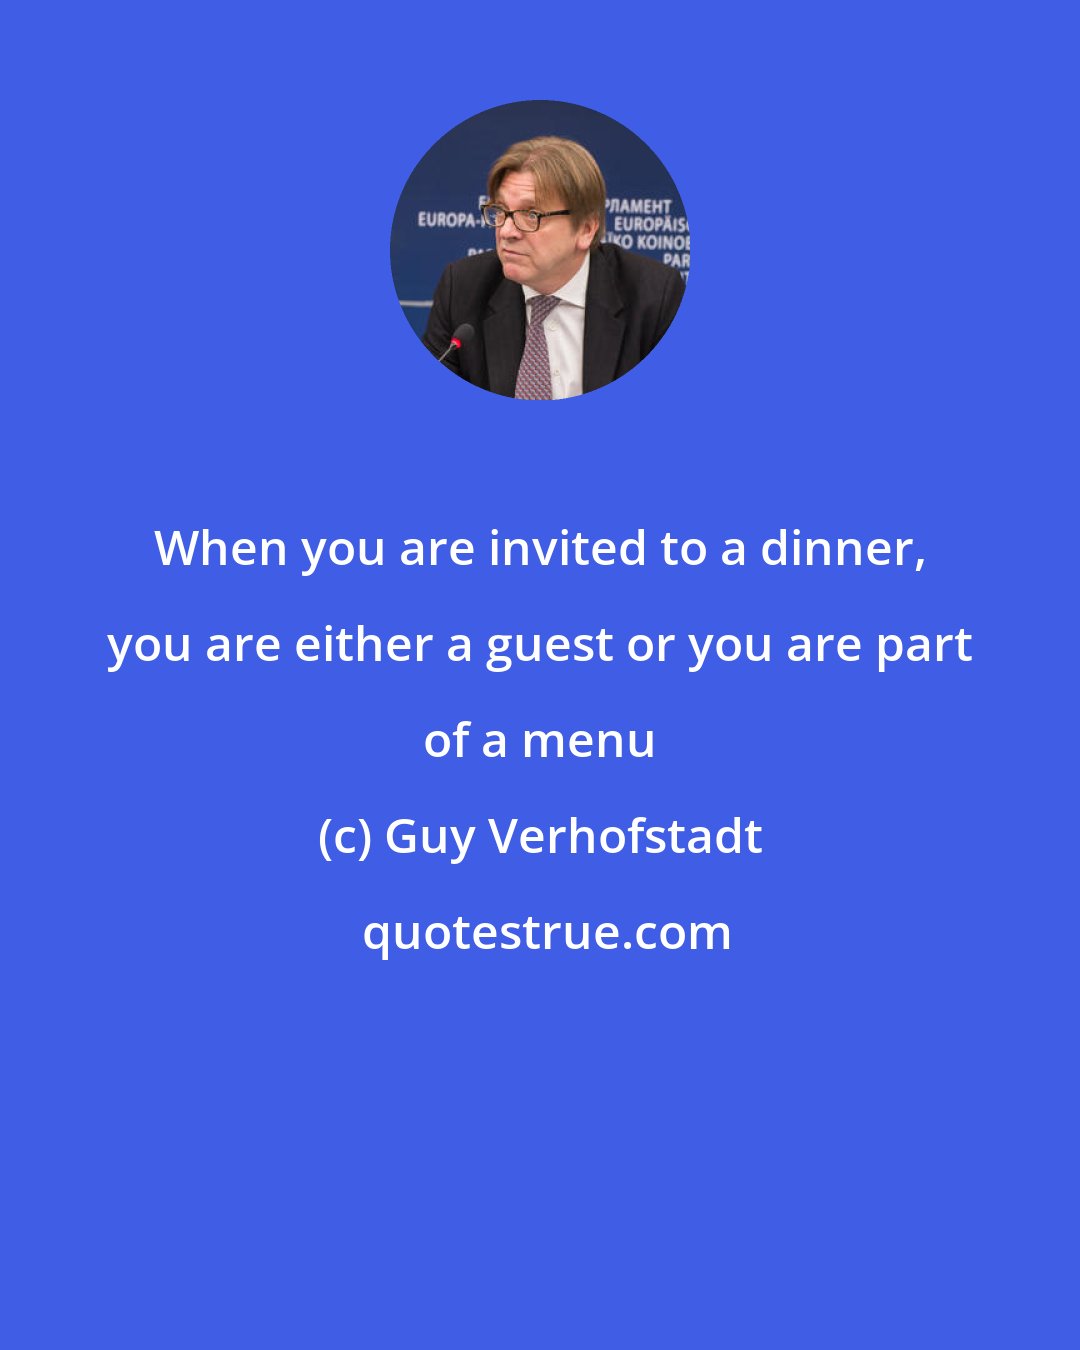 Guy Verhofstadt: When you are invited to a dinner, you are either a guest or you are part of a menu